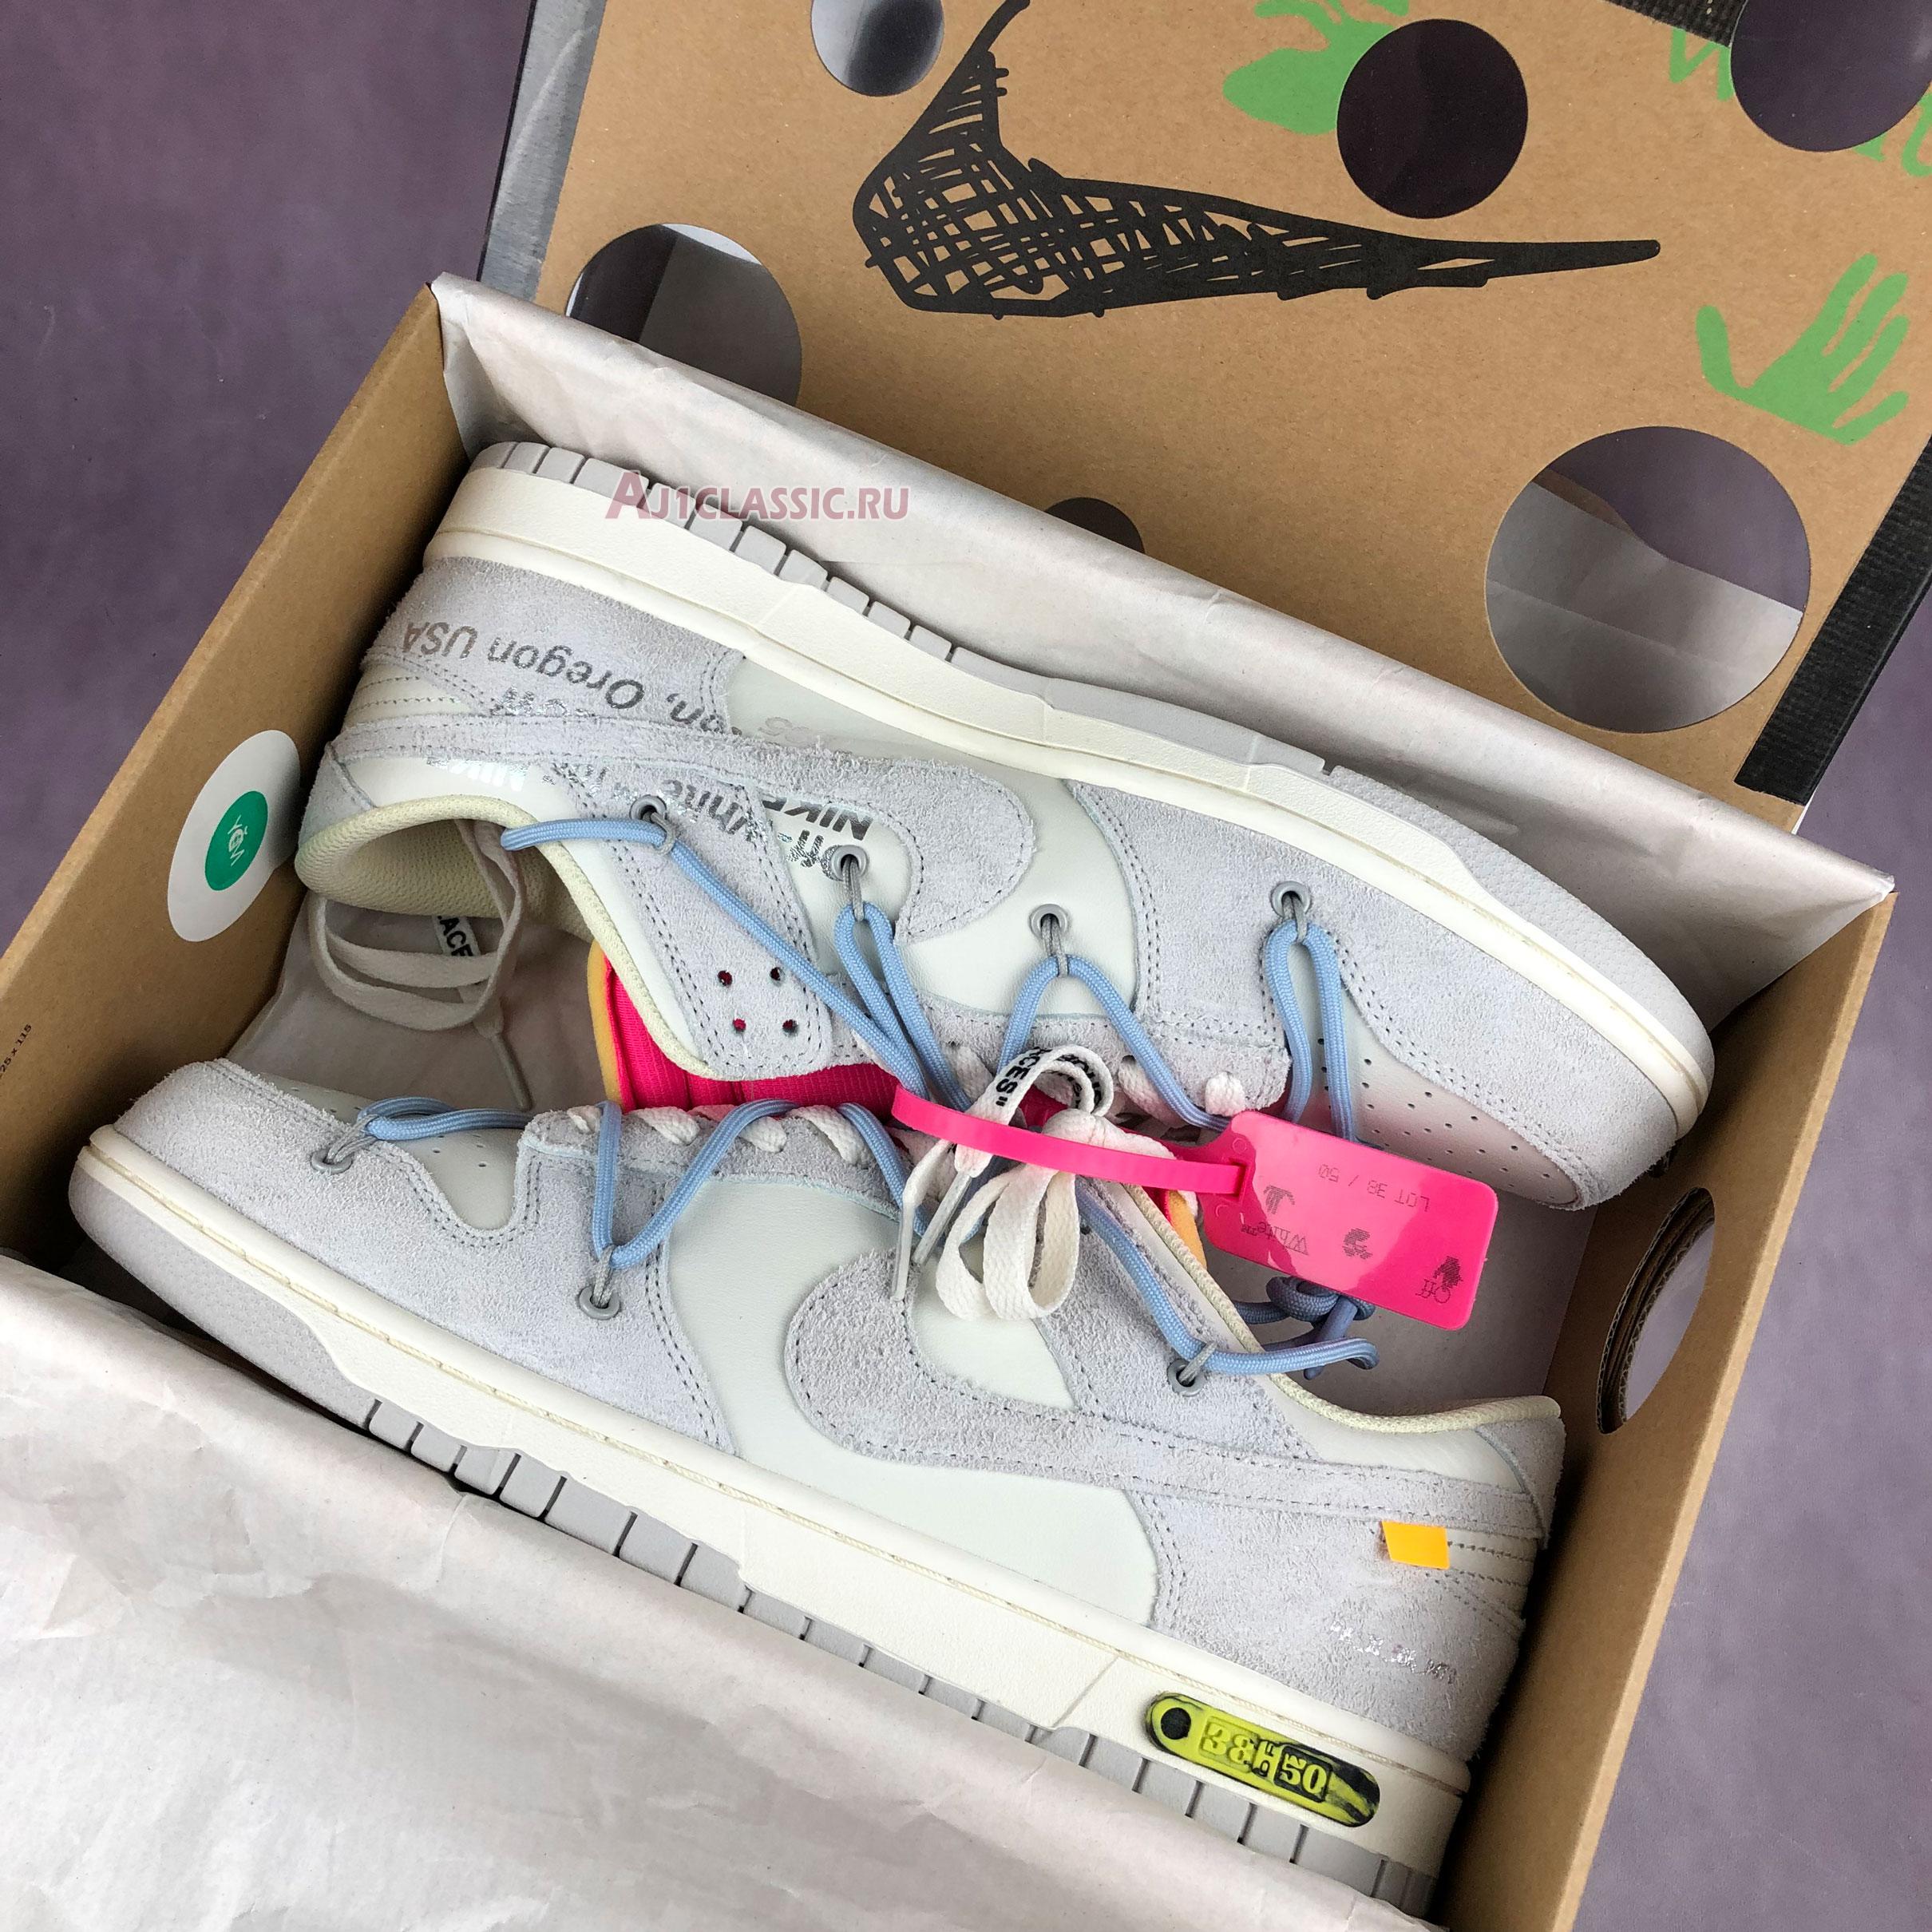 Off-White x Nike Dunk Low Lot 38 of 50 DJ0950-113 Sail/Neutral Grey/Psychic Blue Sneakers